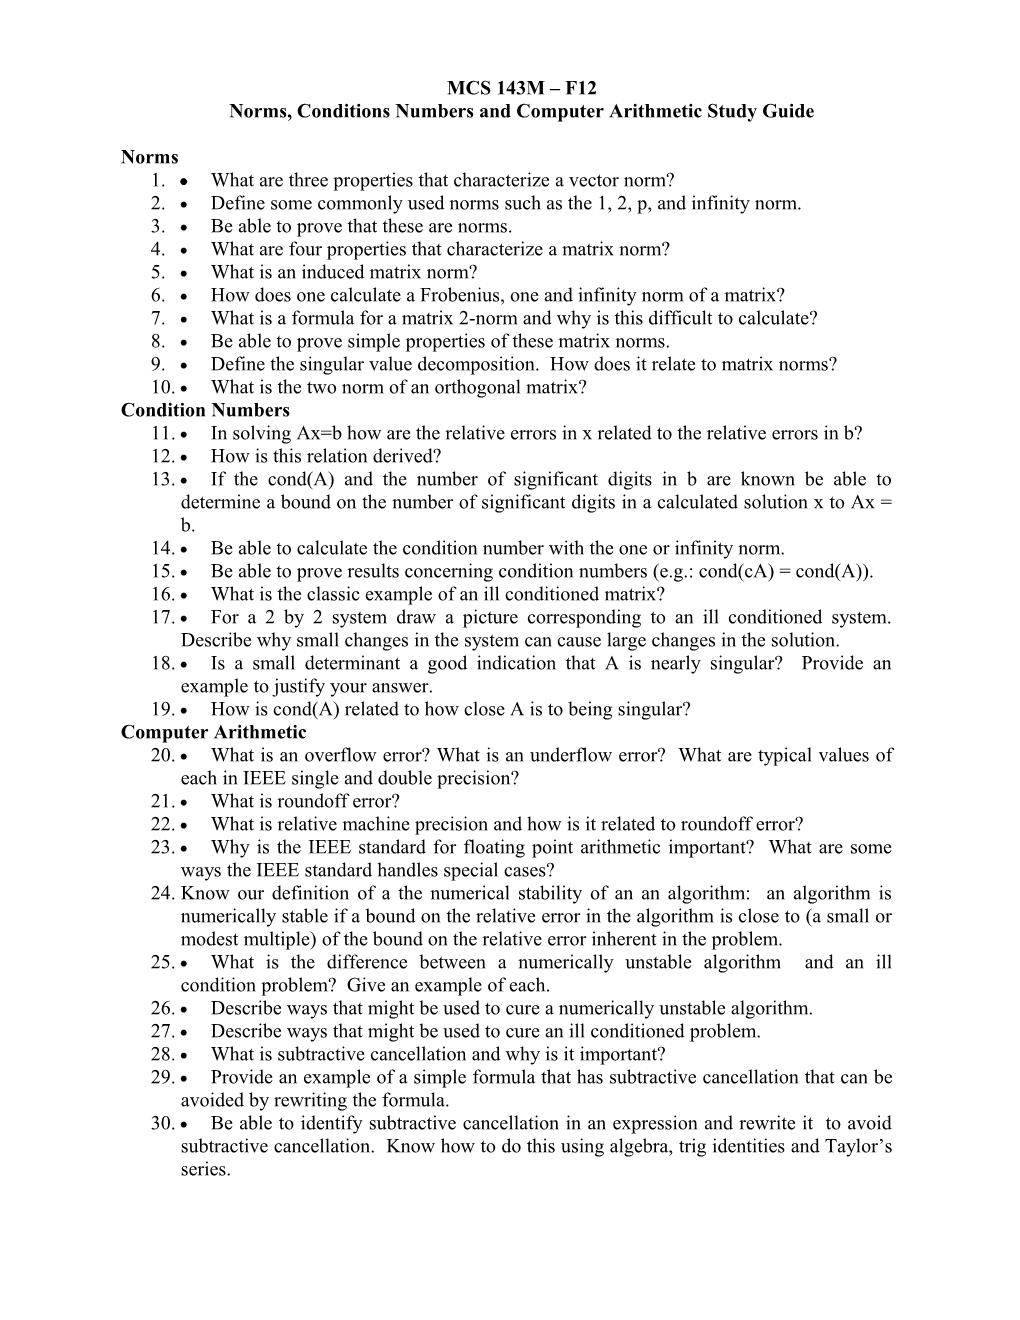 Norms, Conditions Numbers and Computer Arithmetic Study Guide